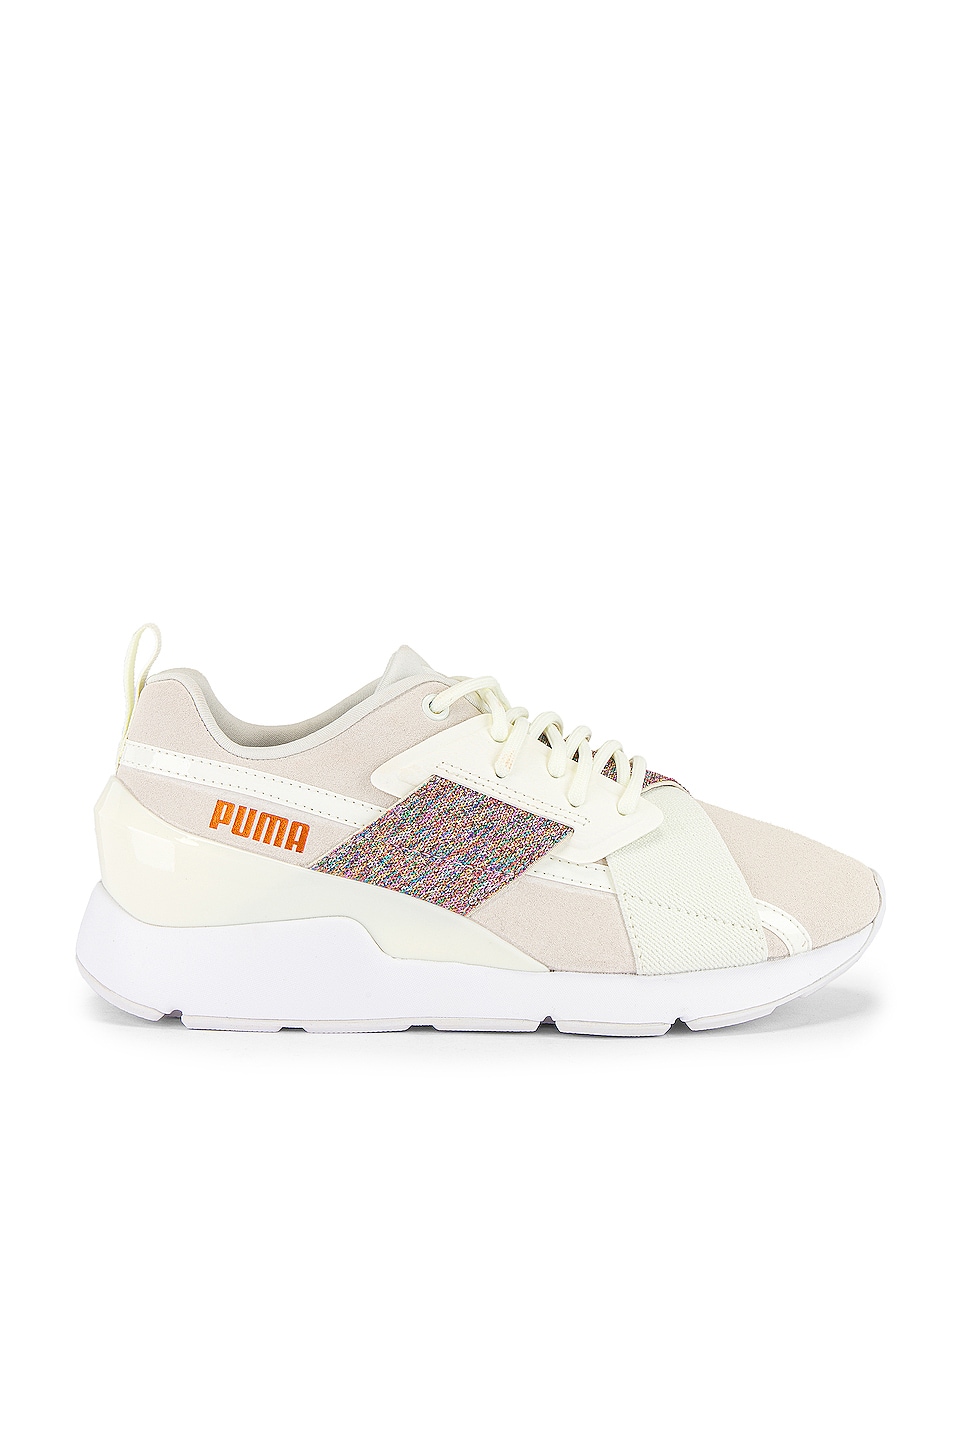 muse sneaker by puma